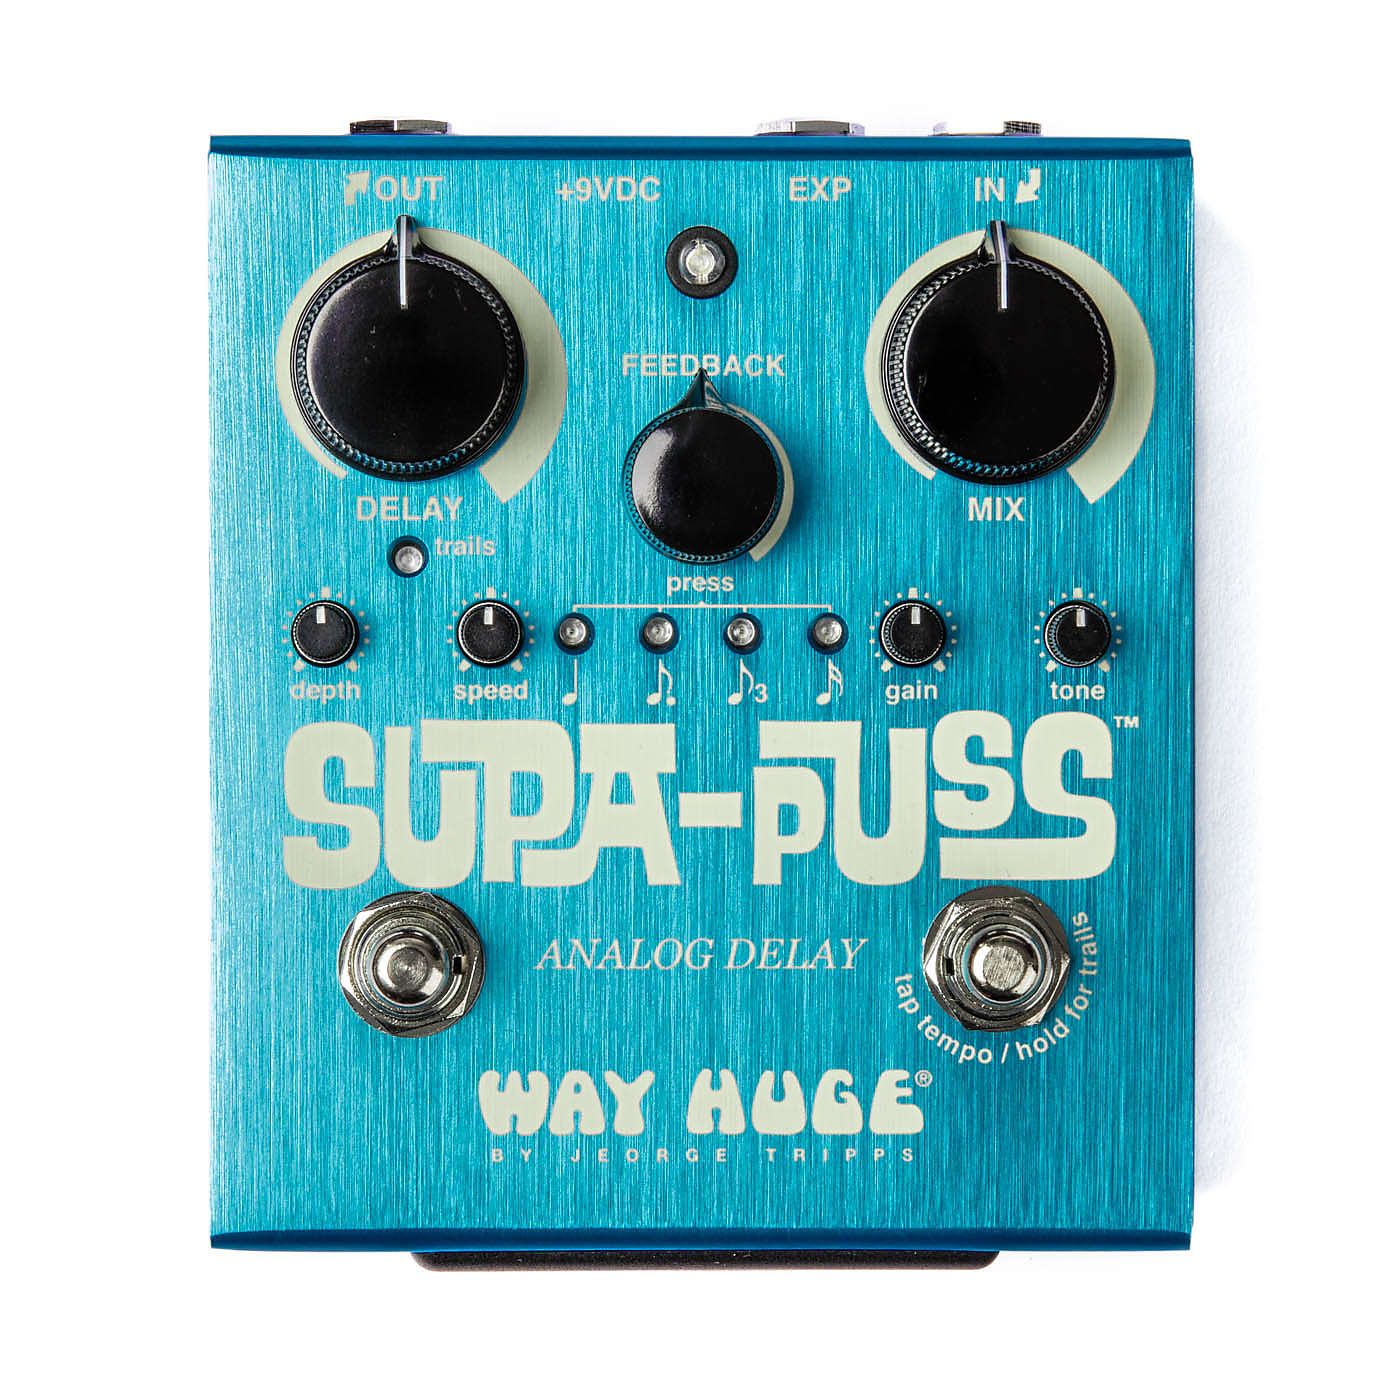 Way Huge WHE707 Supa-Puss Analog Delay Effects Pedal